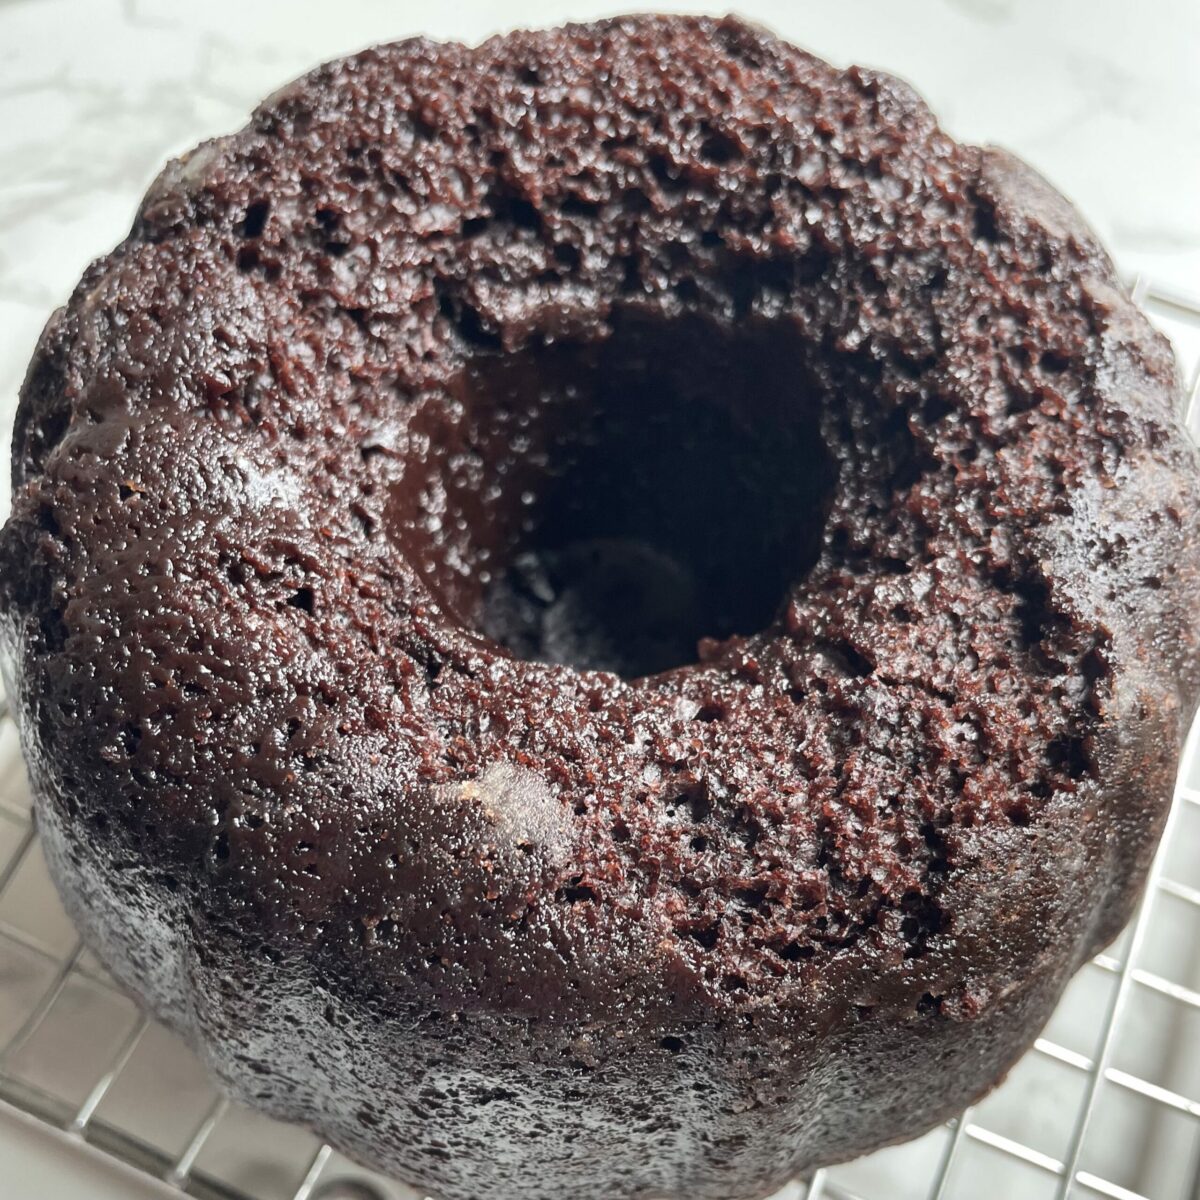 Bundt chocolate cake cooling down on a rack.